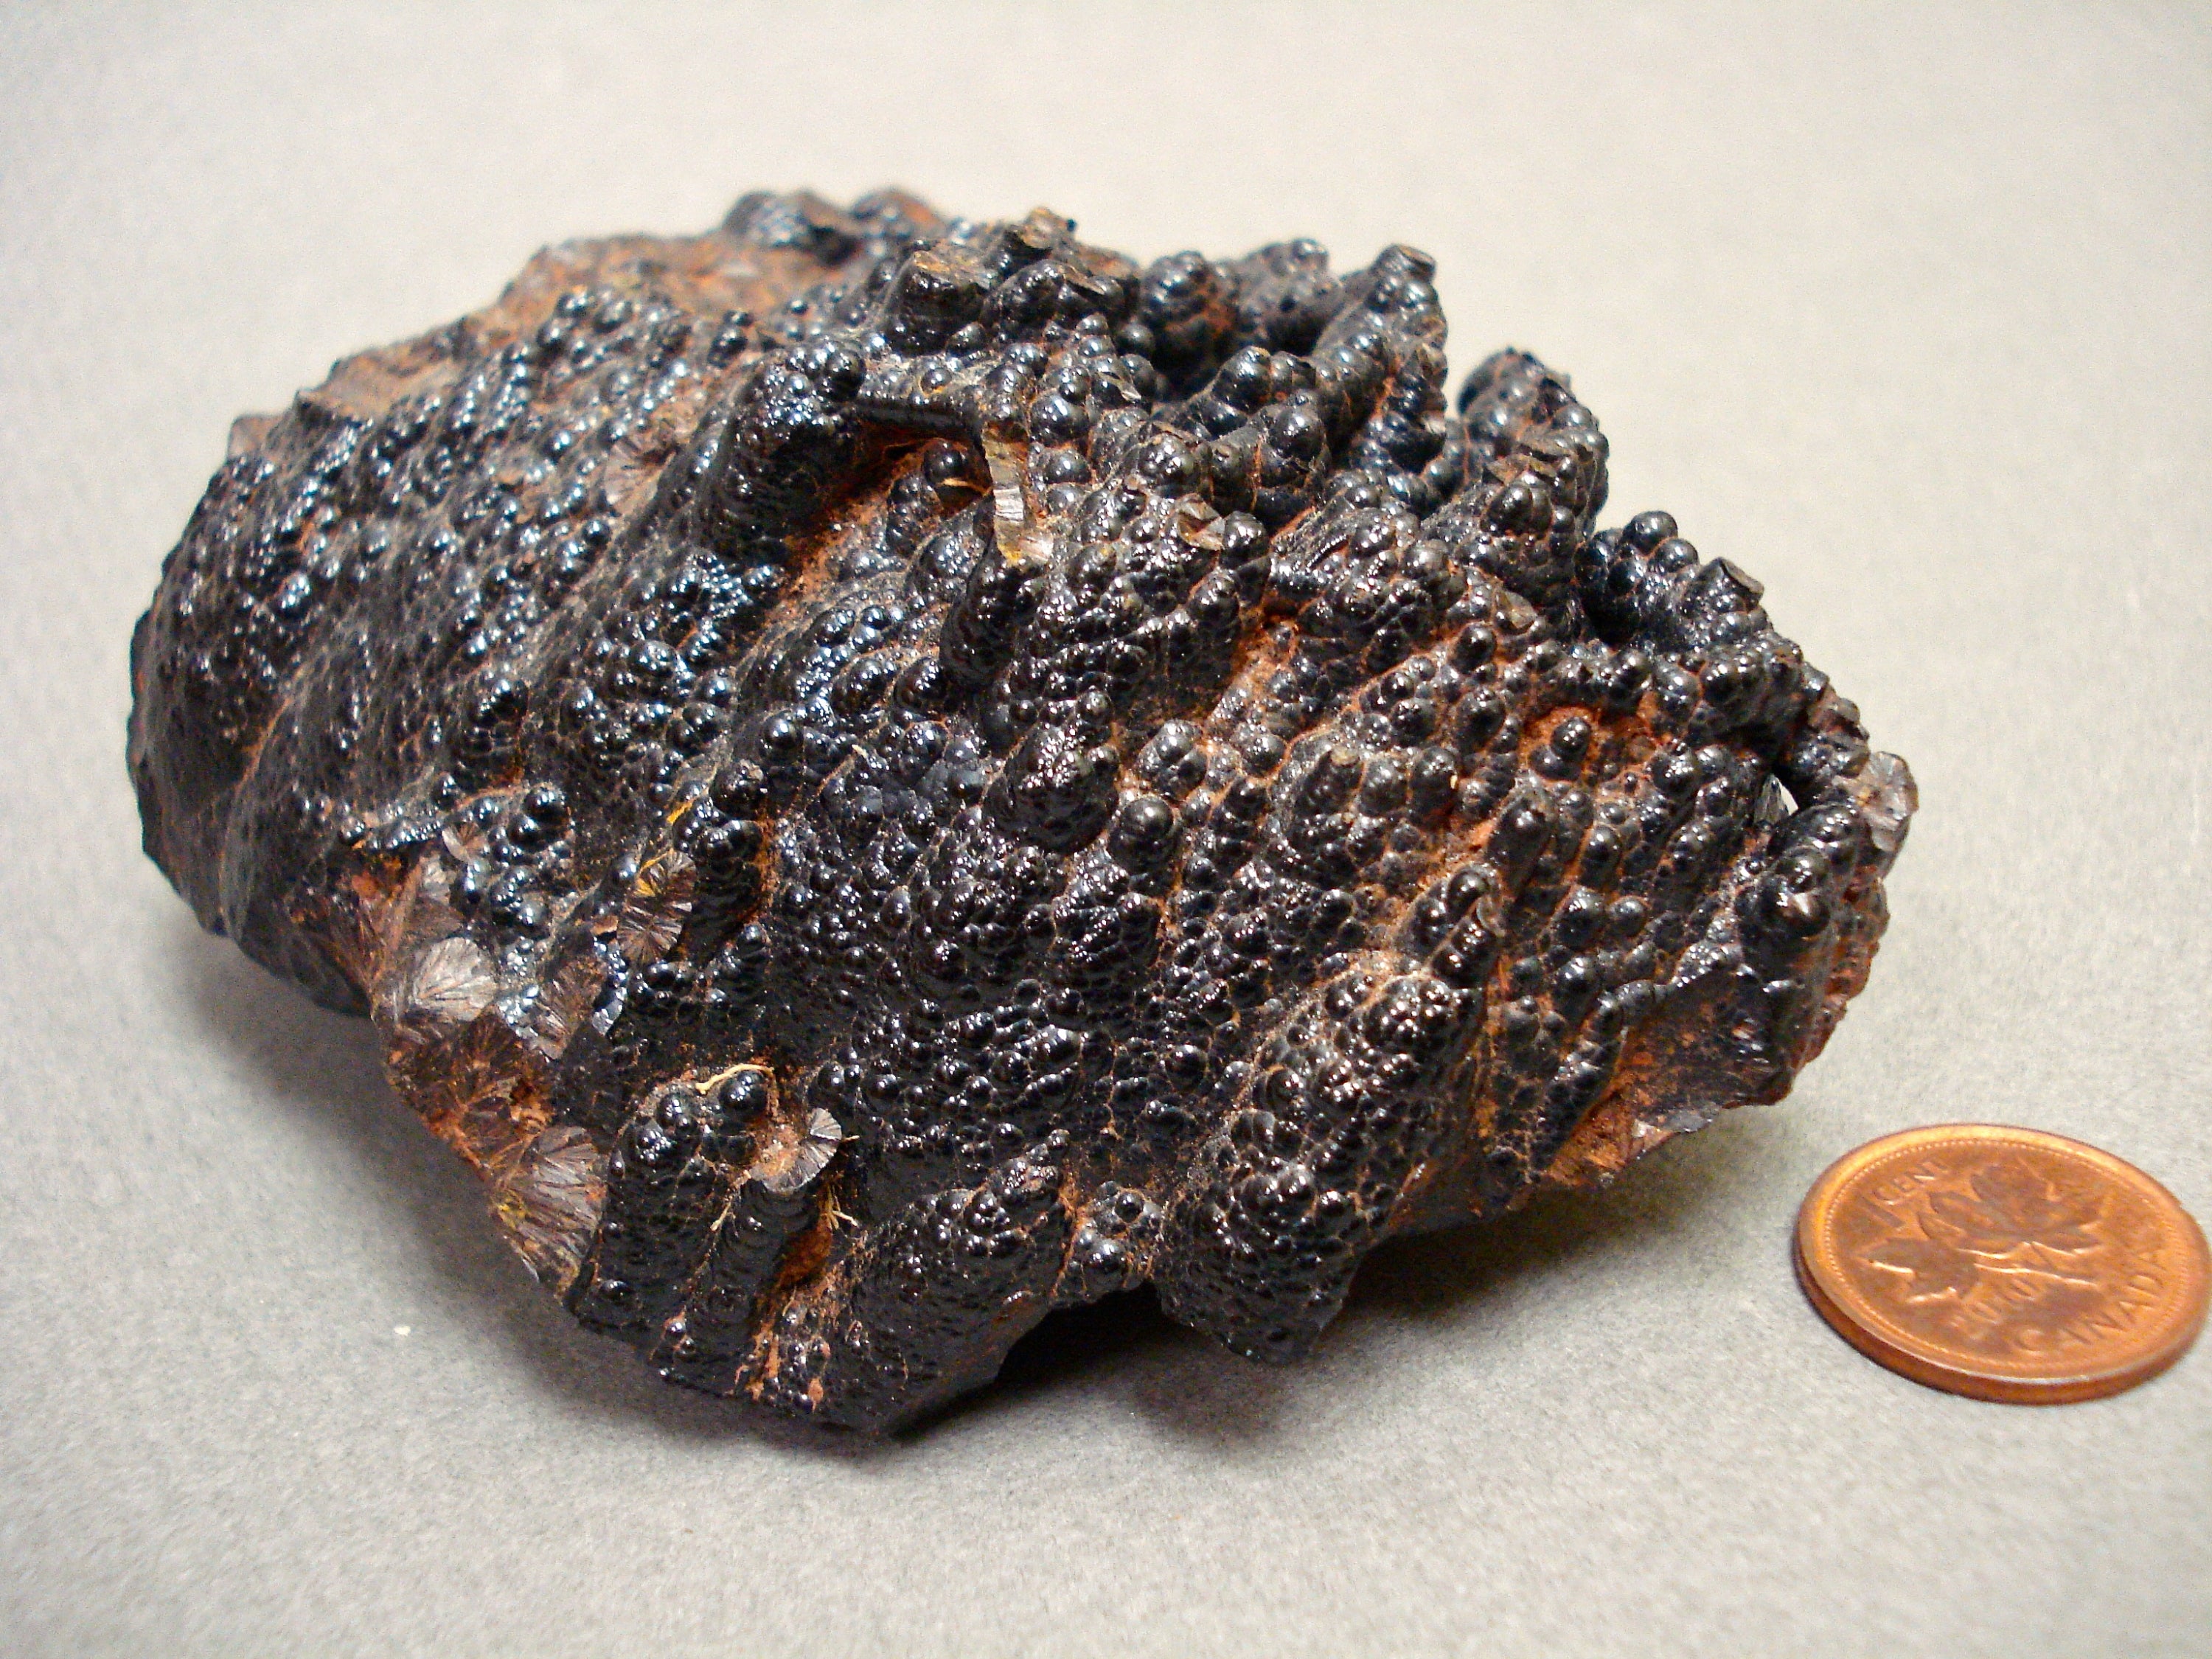 Goethite next to a penny for size comparison